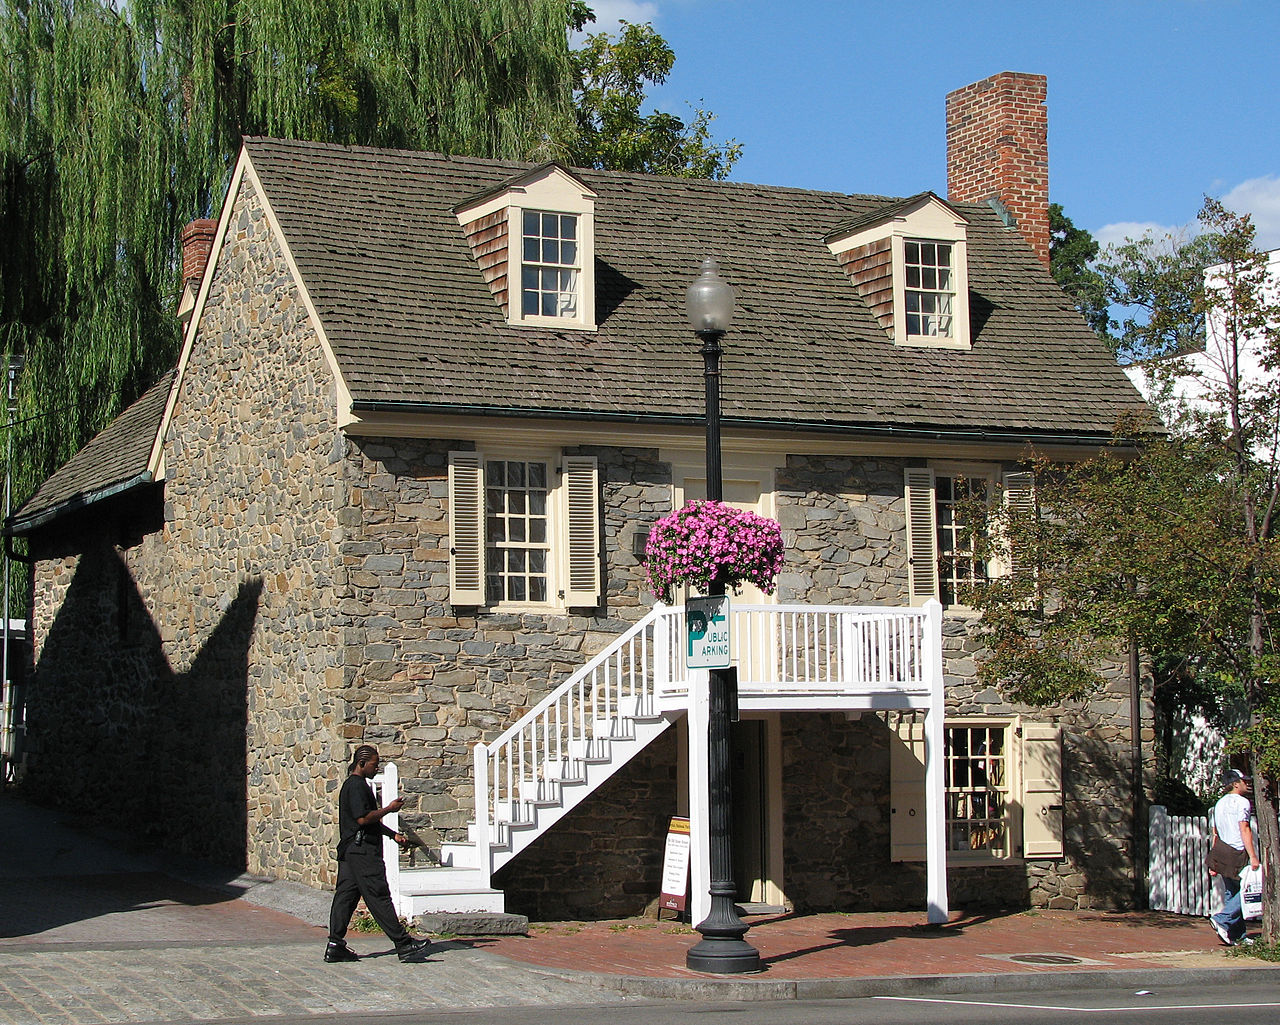 A view of the Old Stone House.